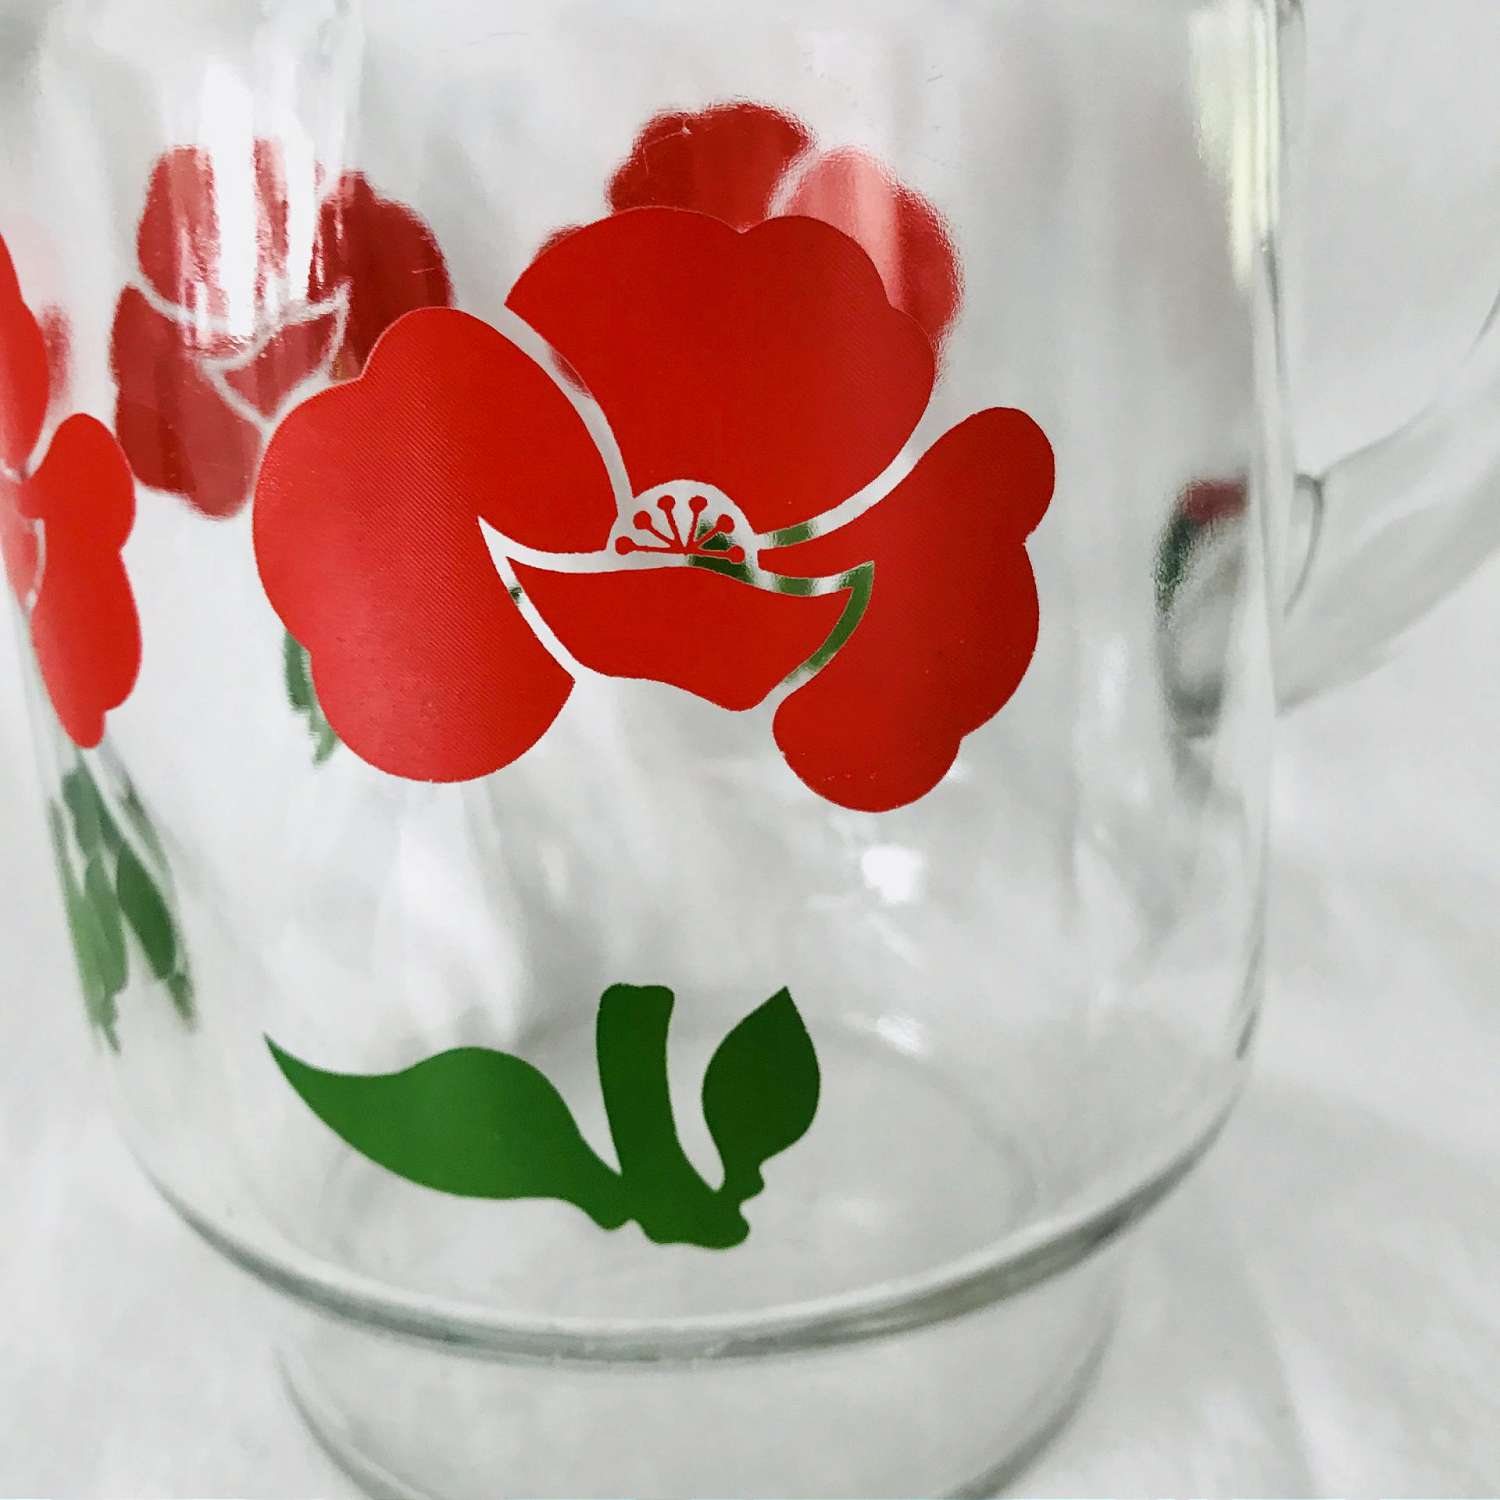 https://www.truevintageantiques.com/wp-content/uploads/2019/12/vintage-pitcher-glass-fired-on-paint-red-flowers-iced-tea-koolaid-collectible-retro-kitchen-display-farmhouse-summer-picnic-patio-water-5df9539a5-scaled.jpg